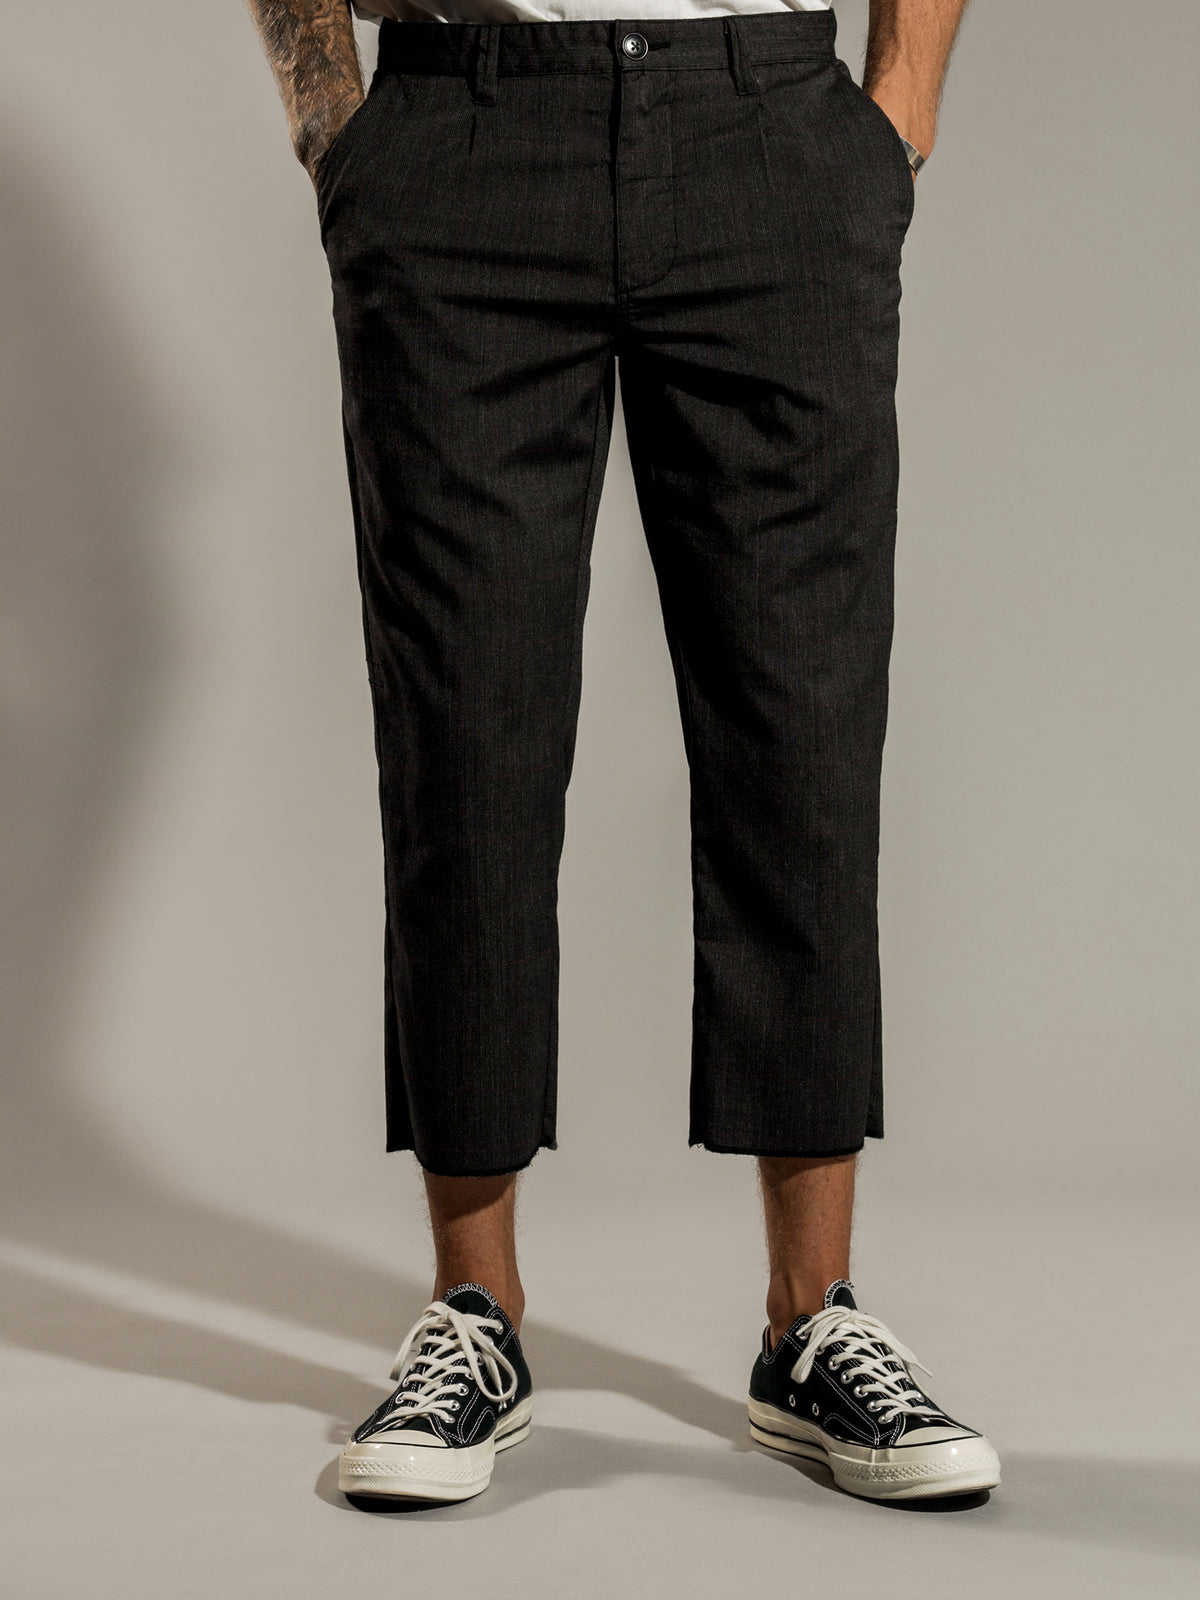 Parallels Chopped Chino Pants in Dark Charcoal